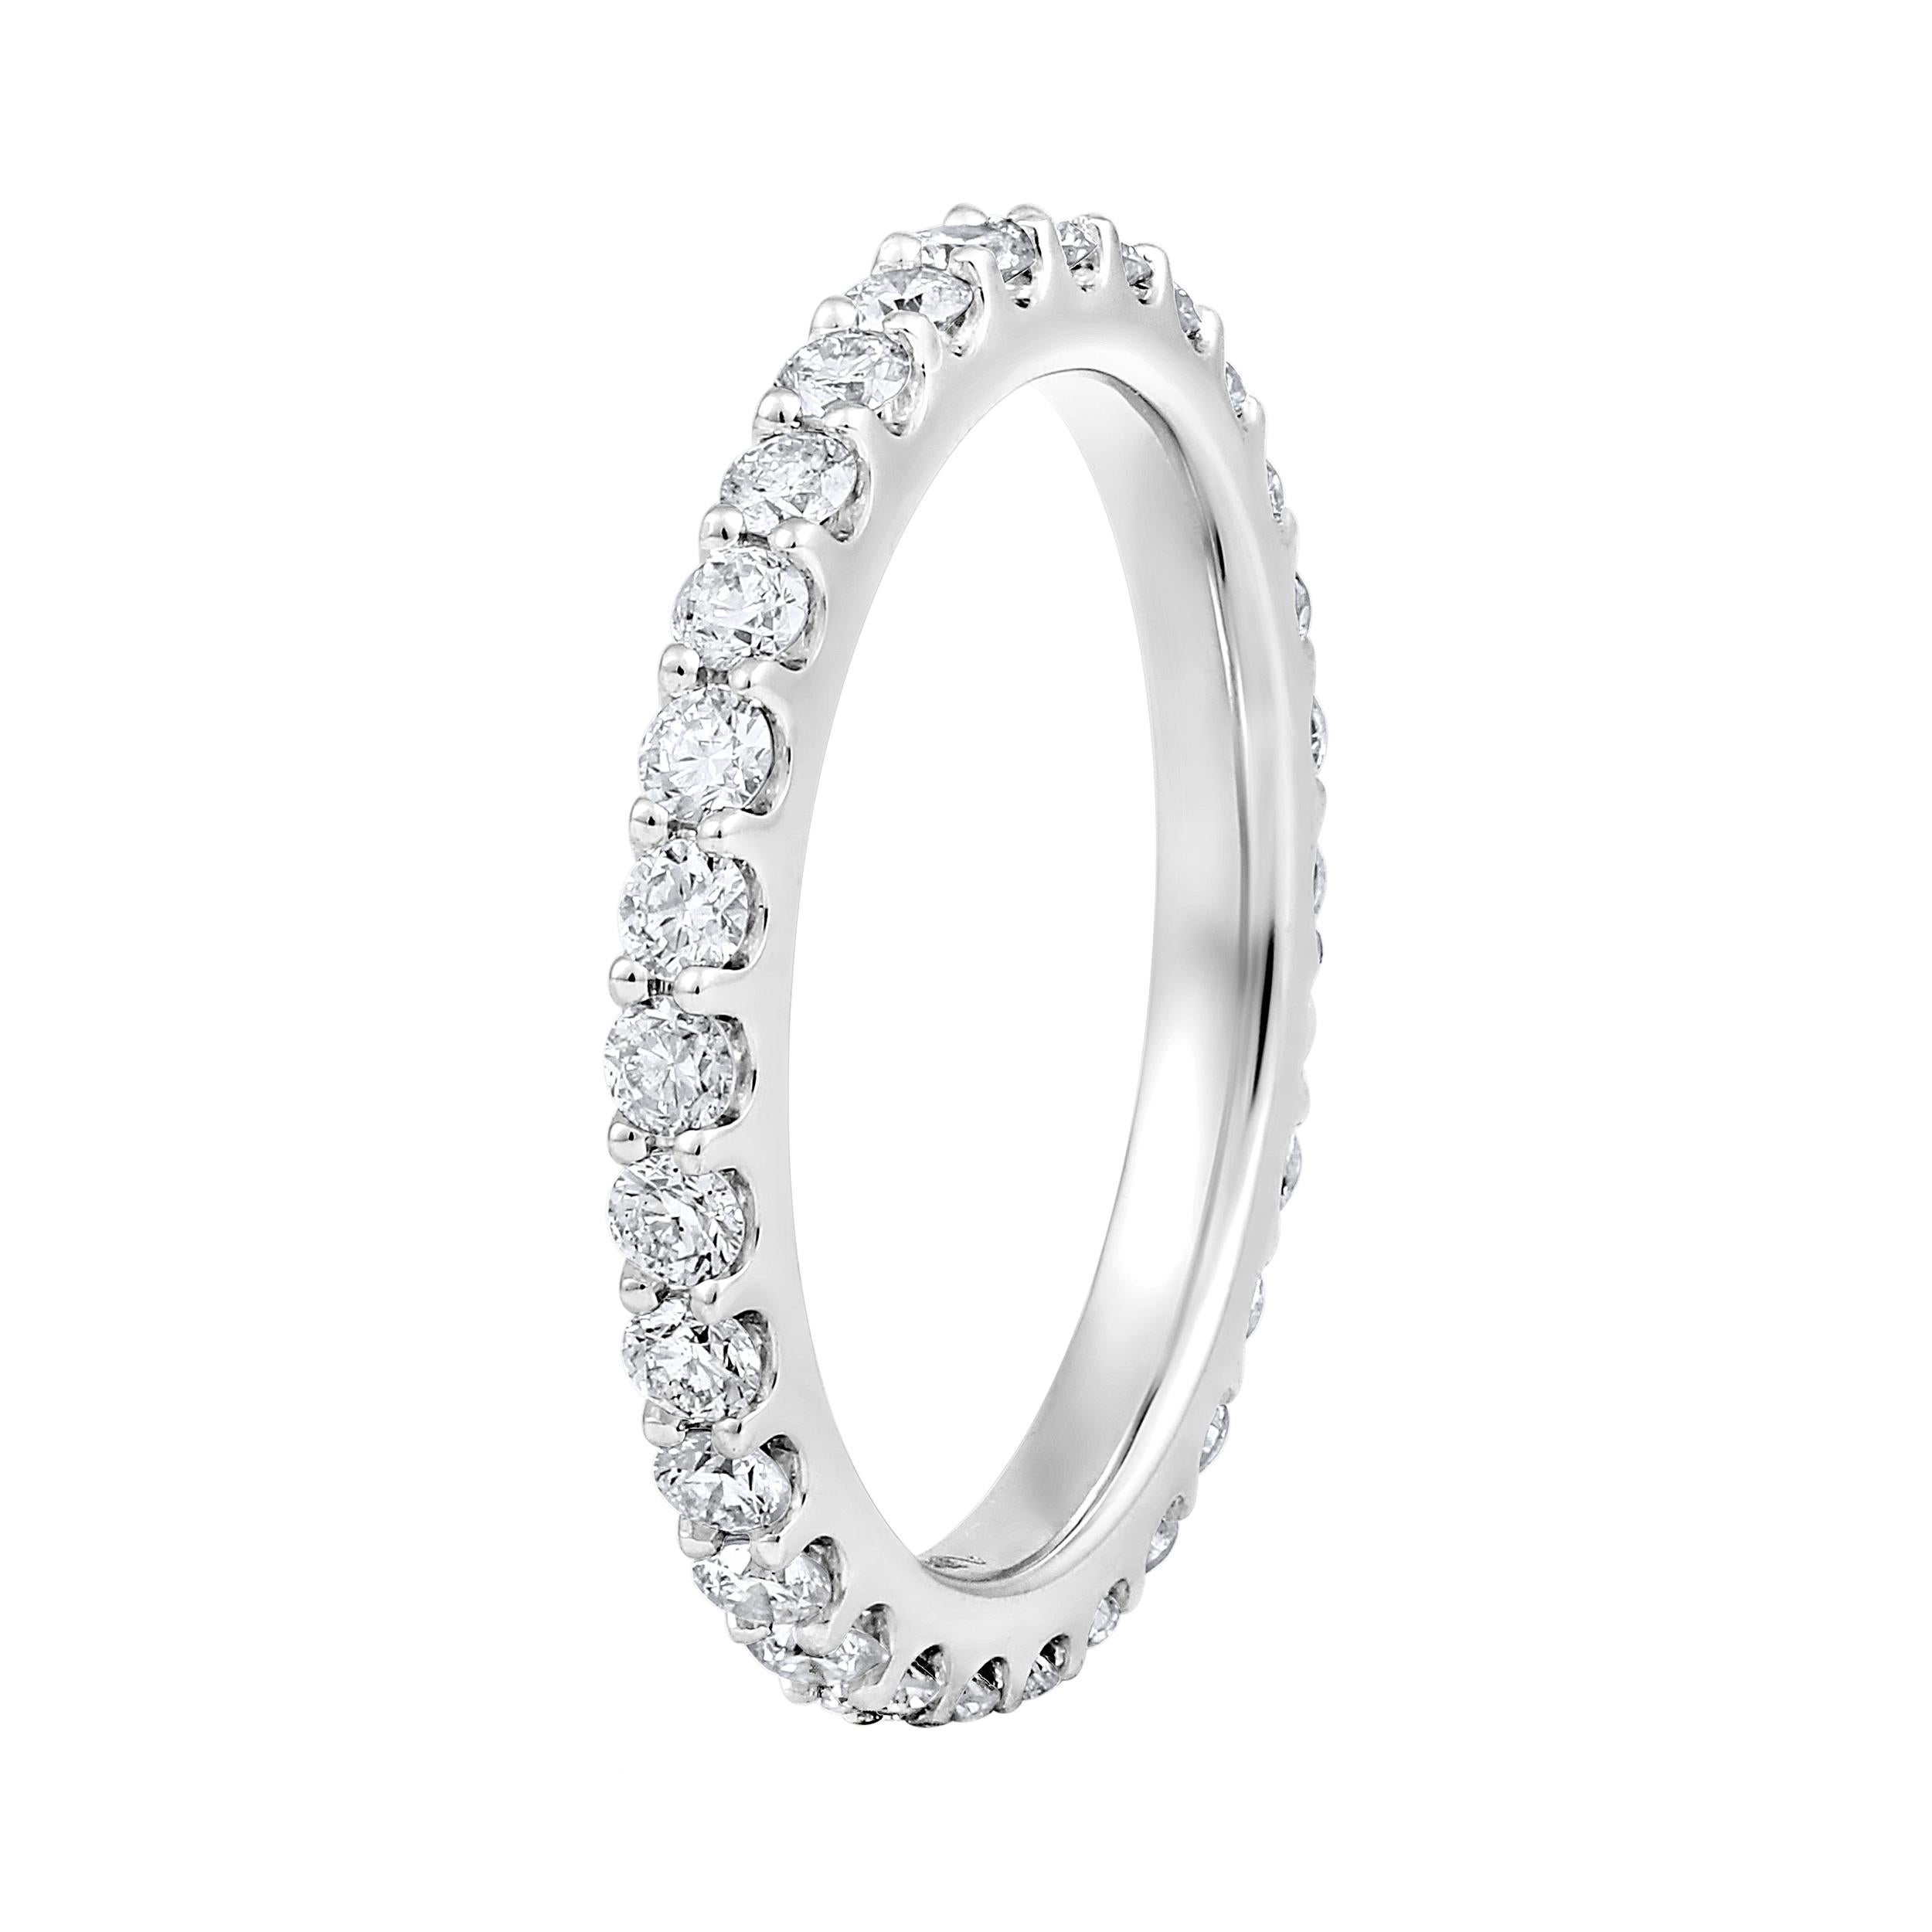 Ring Size: US 7 

Crafted in 2.7 grams of 14K White Gold, the ring contains 30 stones of Round Diamonds with a total of 1.01 carat in G-H color and SI clarity.

CONTEMPORARY AND TIMELESS ESSENCE: Crafted in 14-karat/18-karat with 100% natural